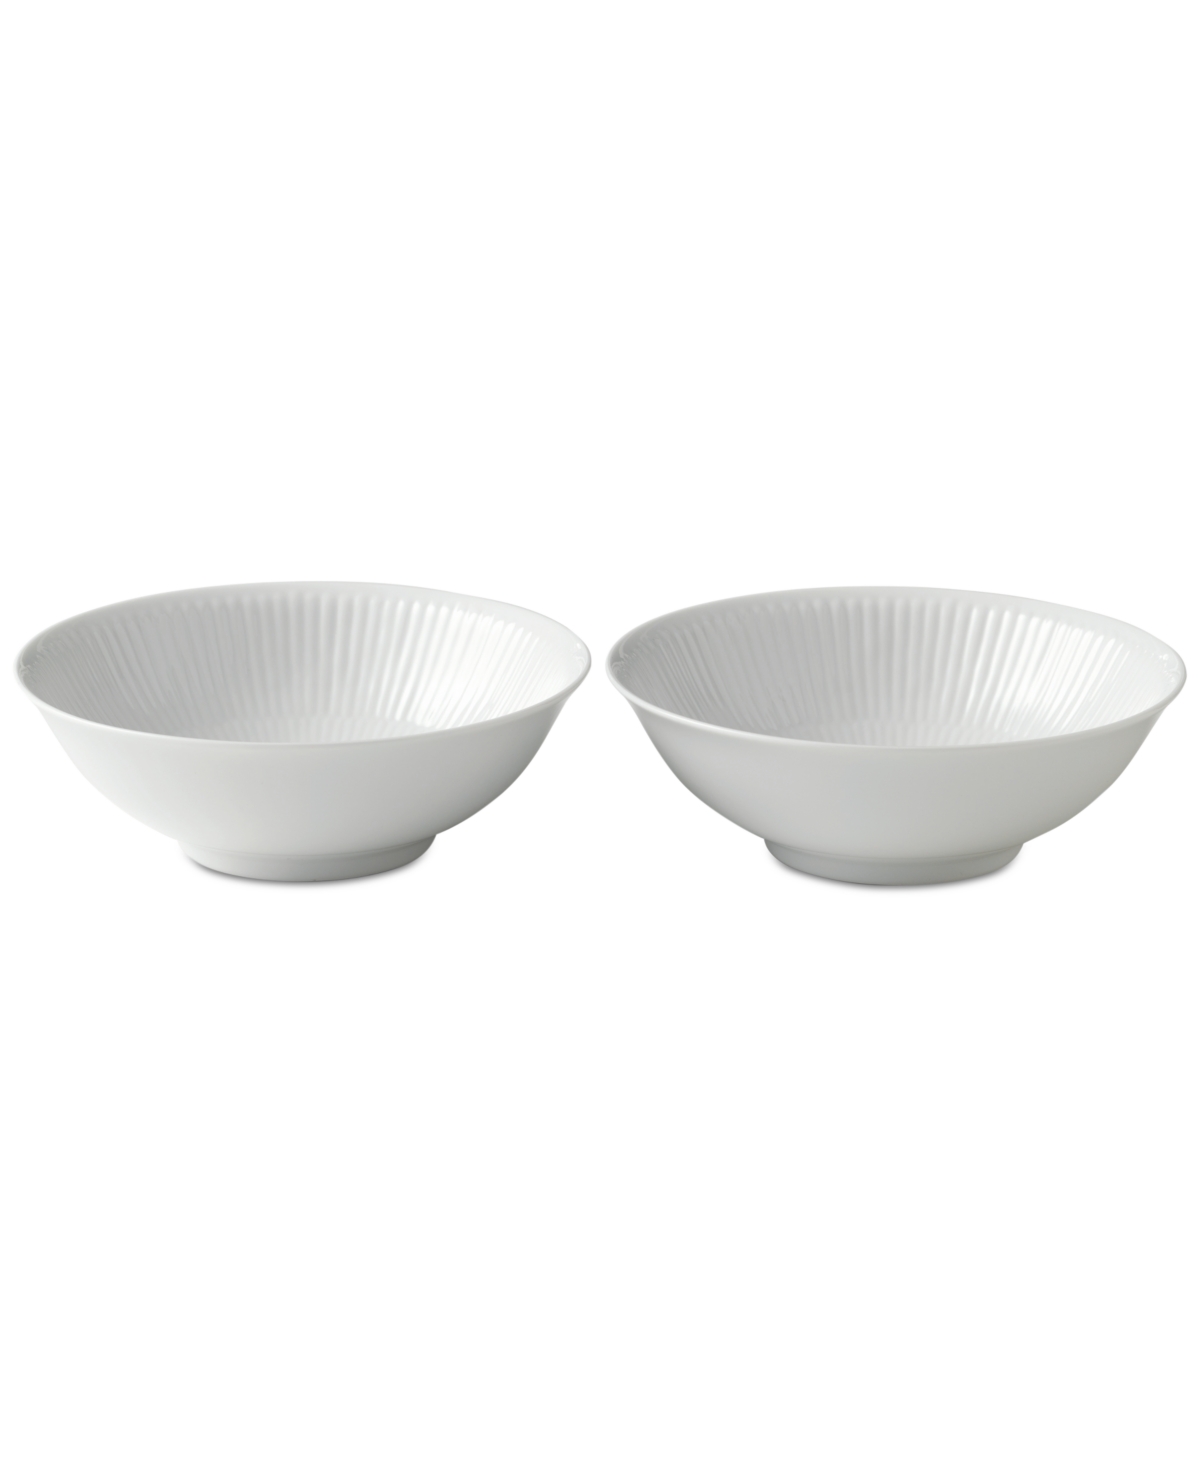 White Fluted Cereal Bowls, Set of 2 - White